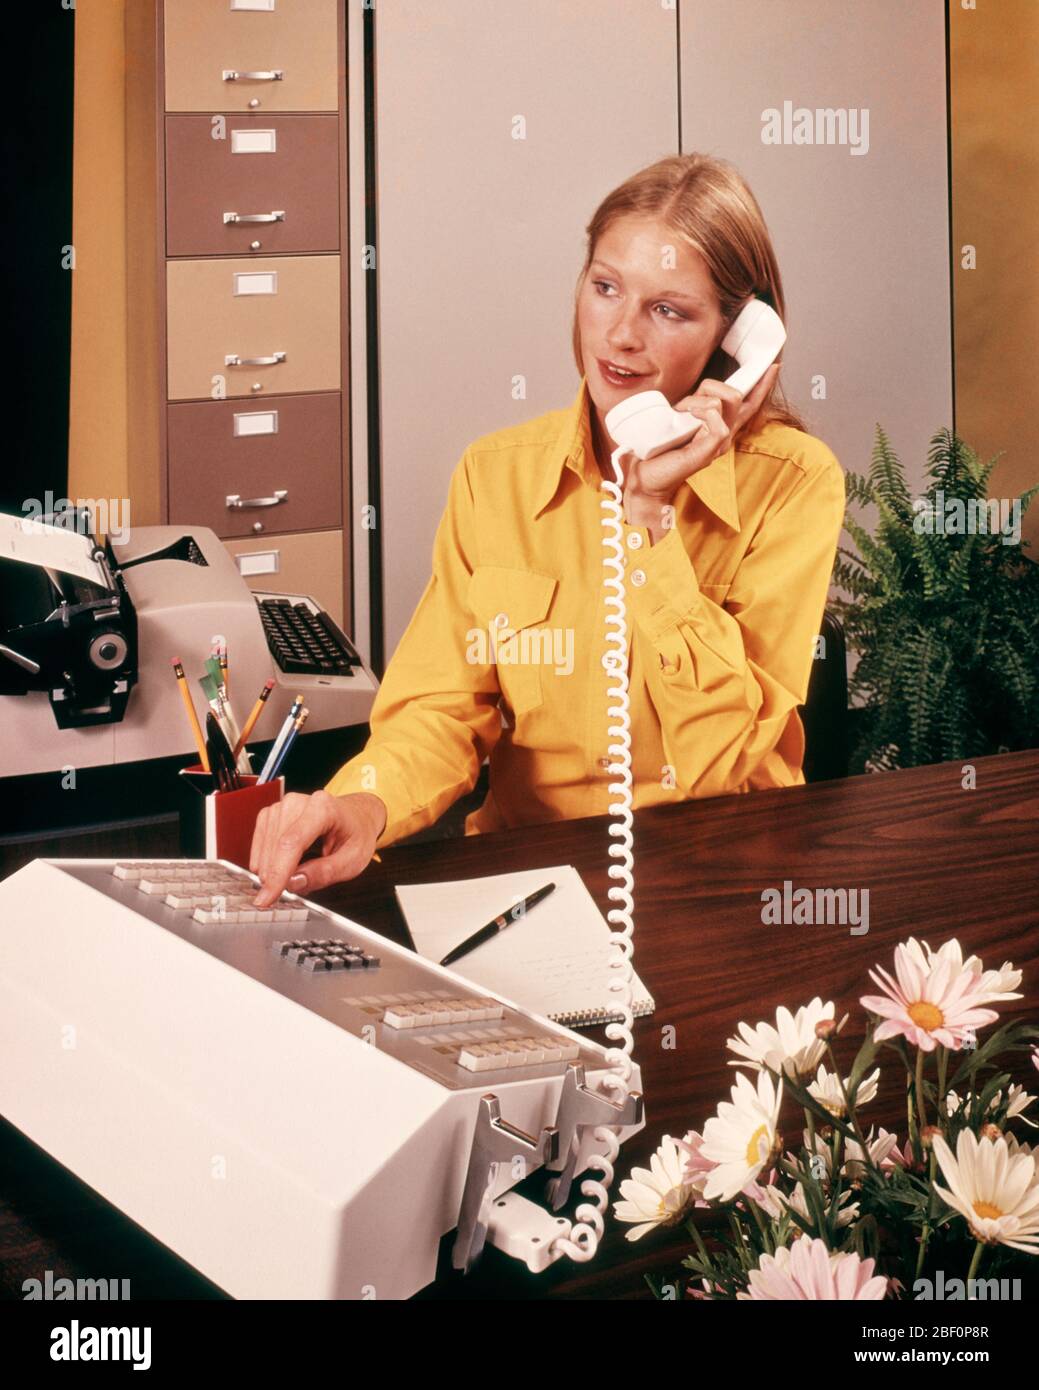 1970s BLONDE RECEPTIONIST YELLOW BLOUSE ANSWERING PHONE PRESSING BUTTON ON TELEPHONE SWITCHBOARD CONSOLE DAISY ARRANGEMENT  - ko900 PHT001 HARS LADIES PERSONS GROWN-UP CONFIDENCE ANSWERING DAISY WORK PLACE SWITCHBOARD CONSOLE HIGH ANGLE CUSTOMER SERVICE OFFICE WORKER BLOUSE OCCUPATIONS CONNECTION ELECTRIC APPLIANCE GAL FRIDAY ADMINISTRATOR SECRETARIES STYLISH PRESSING AMANUENSIS COMMUNICATE YOUNG ADULT WOMAN CAUCASIAN ETHNICITY CLERICAL OLD FASHIONED Stock Photo